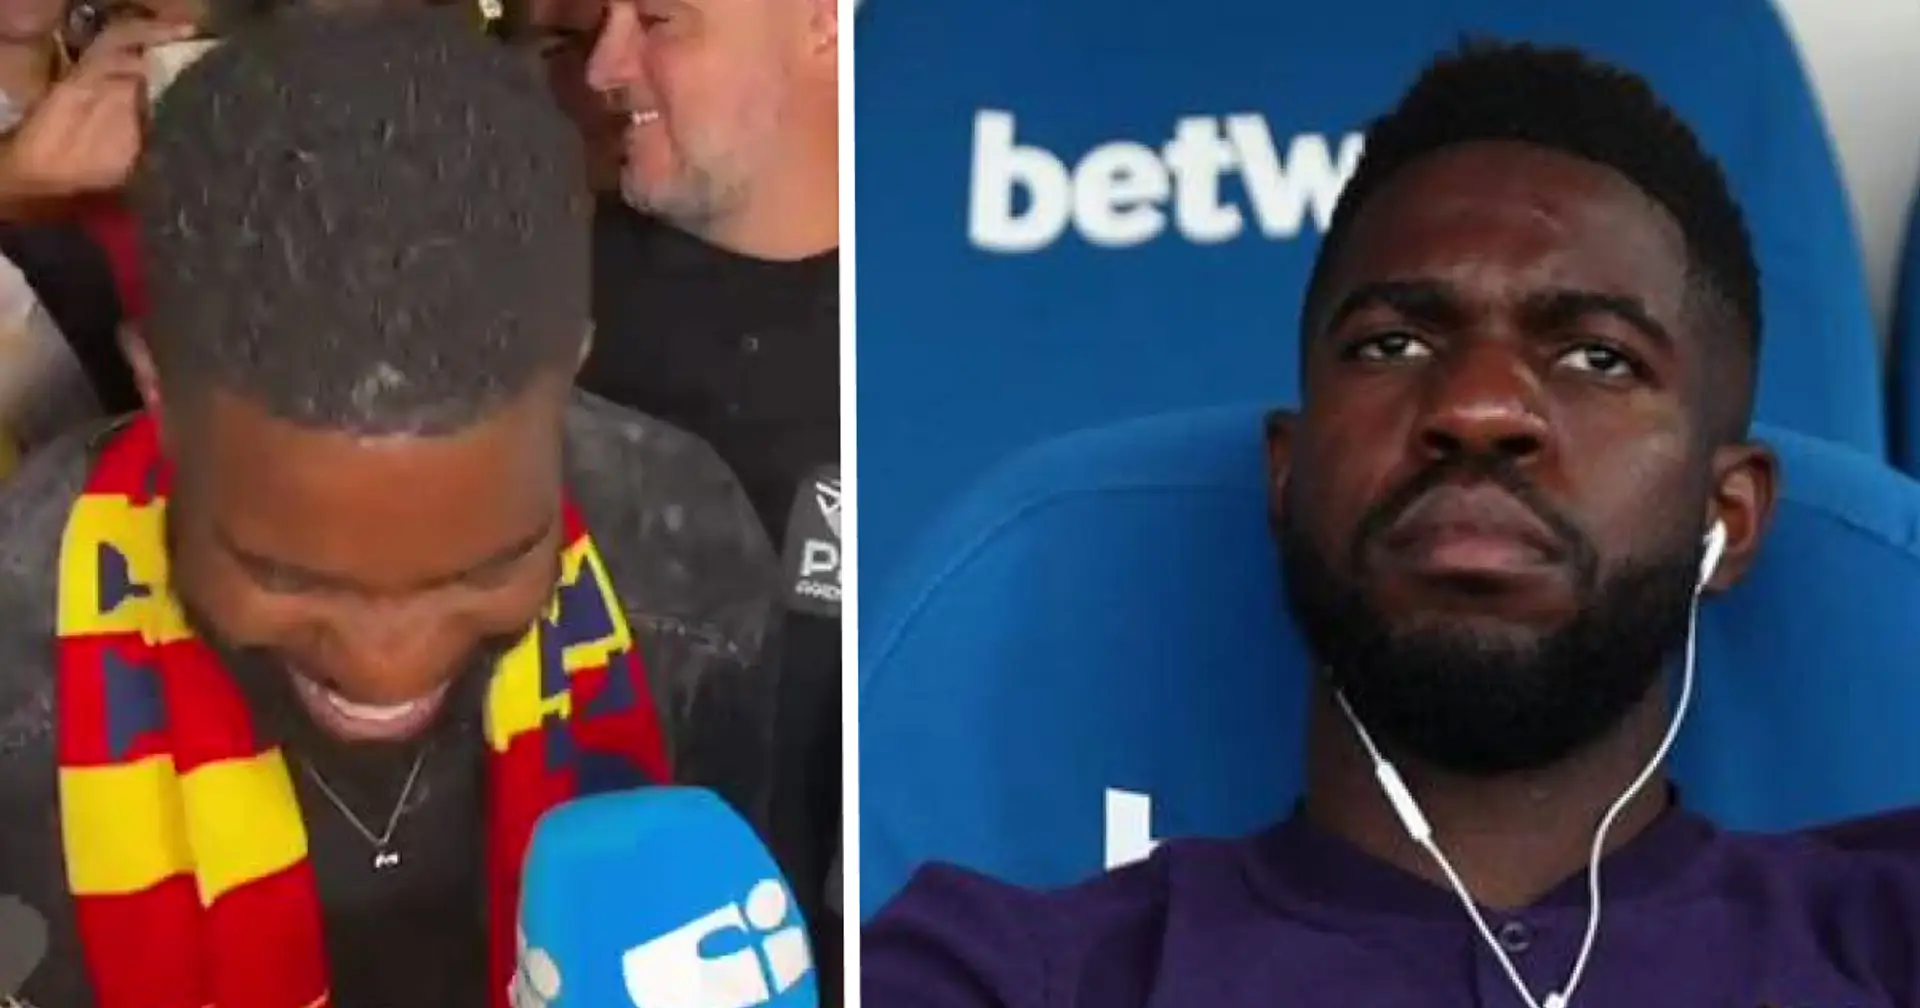 Samuel Umtiti still being benched at Lecce -- manager explains why